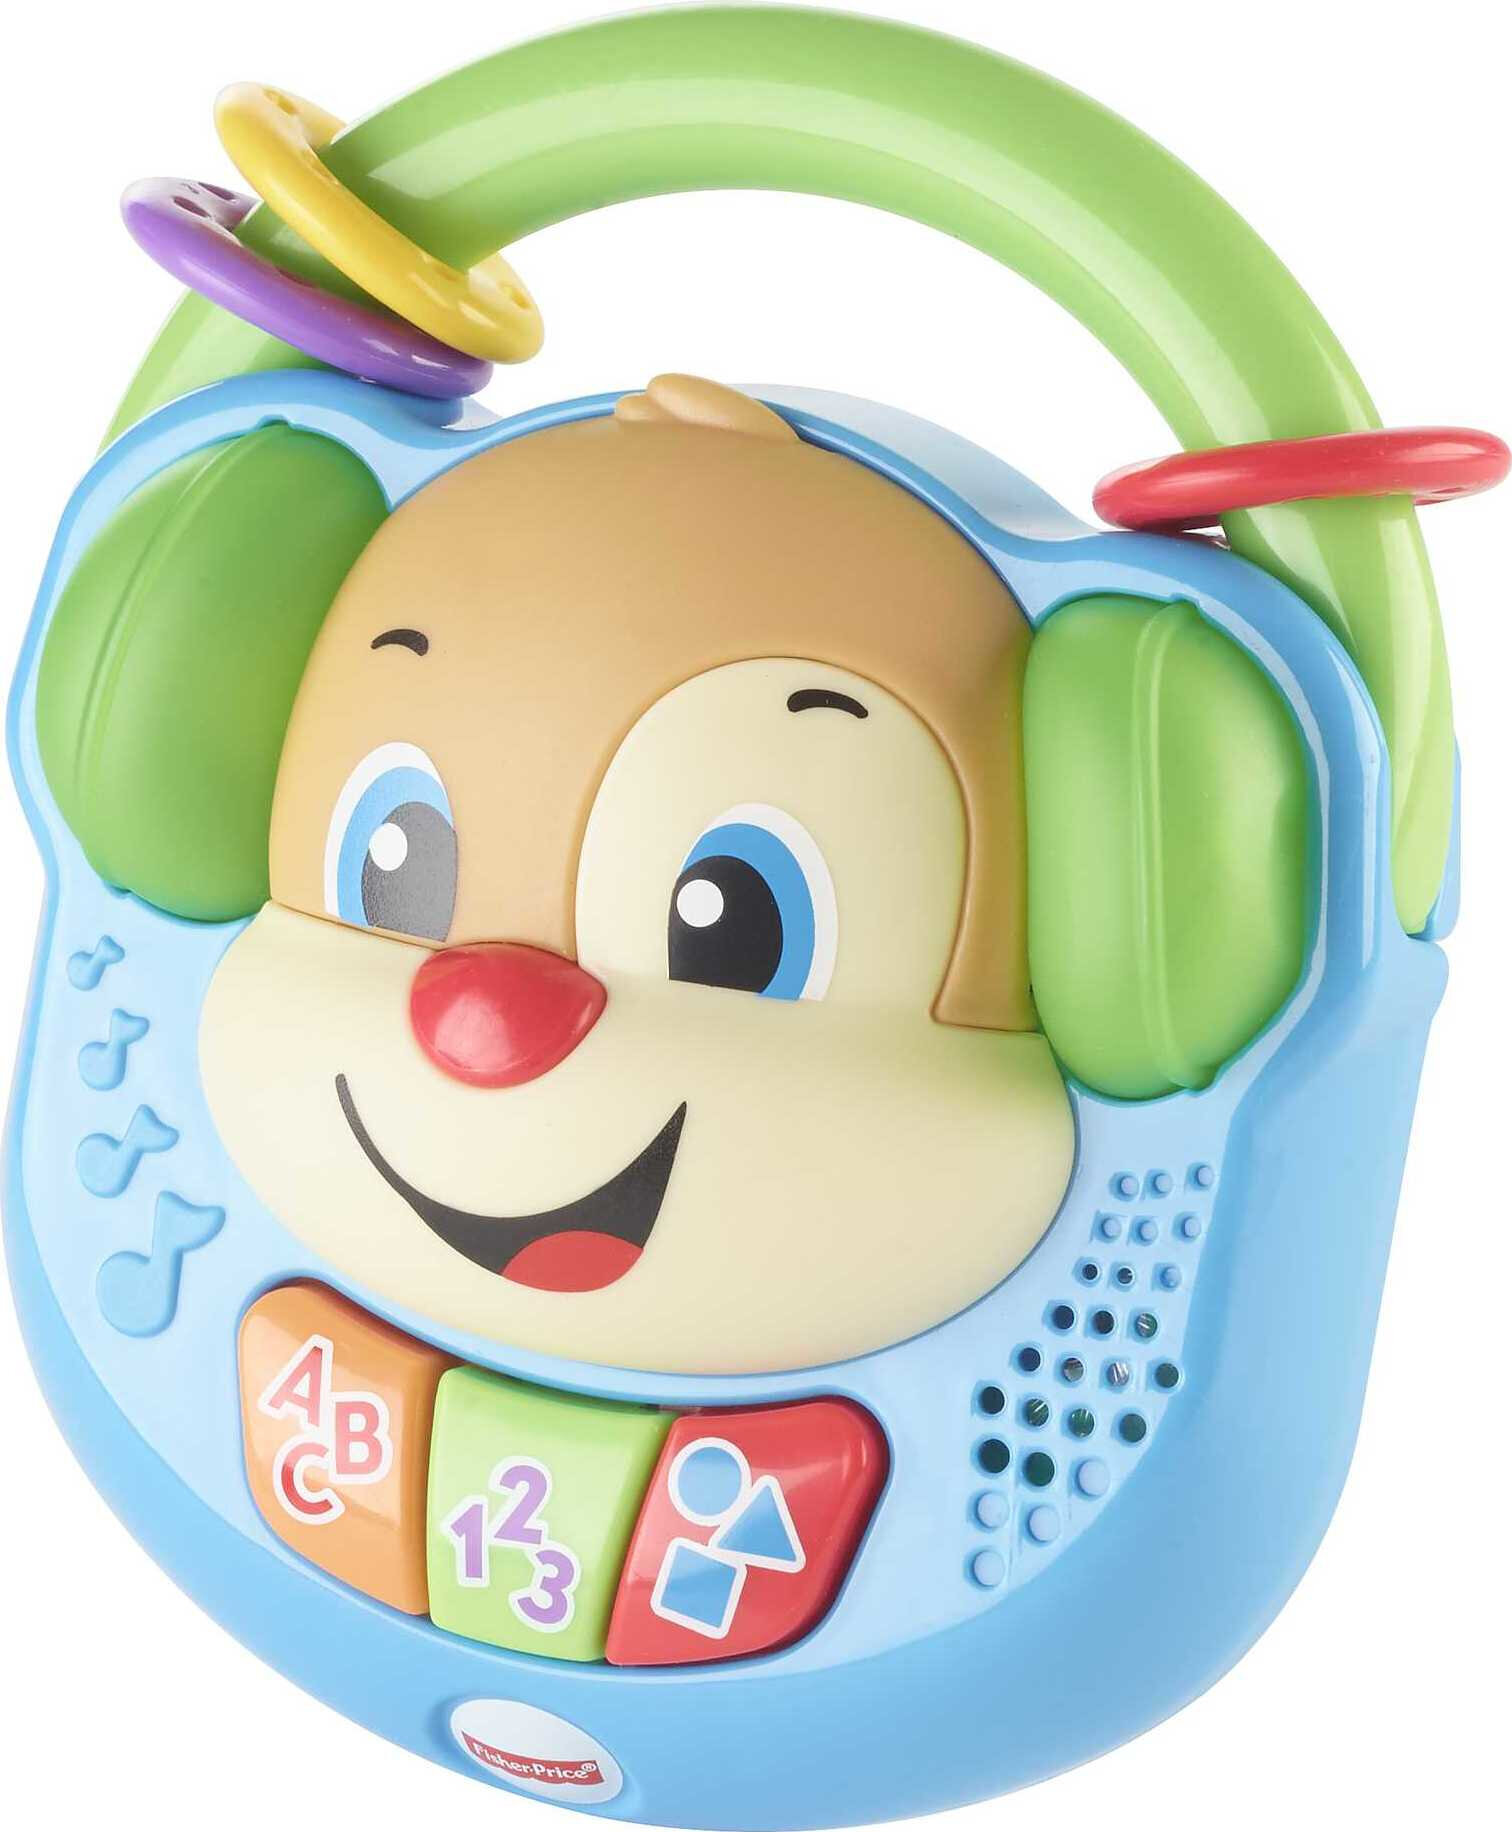 Fisher-Price Laugh & Learn Sing & Learn Music Player Baby & Toddler Toy Pretend Radio - image 1 of 7